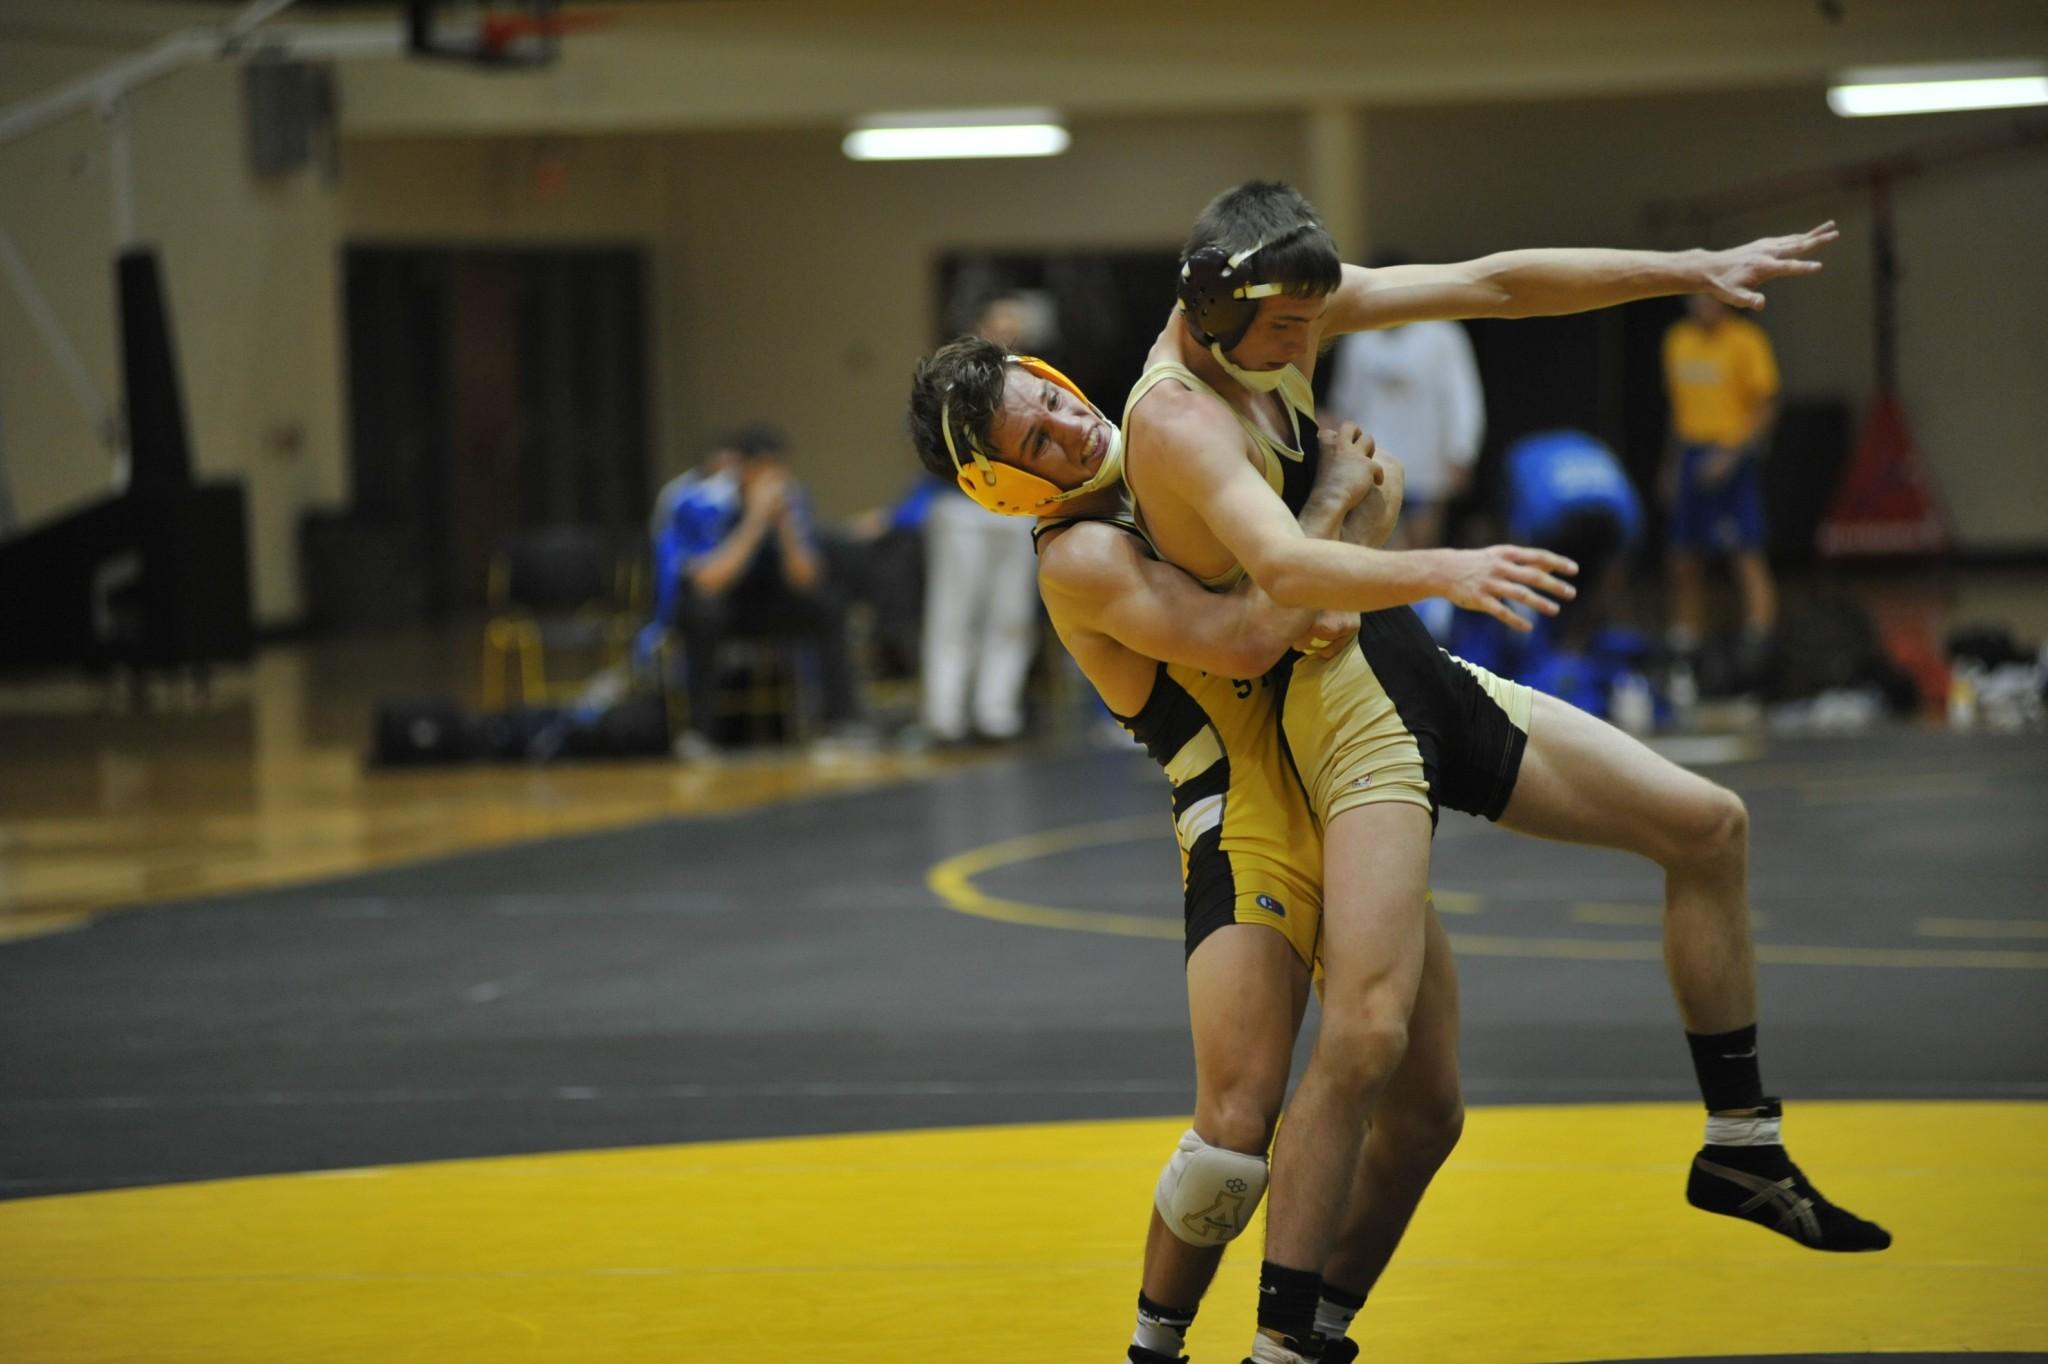 Sophomore Jacob Grigg grapples an opponent during one of three matches on Saturday. The Mountaineers are 3-0 so far this season.